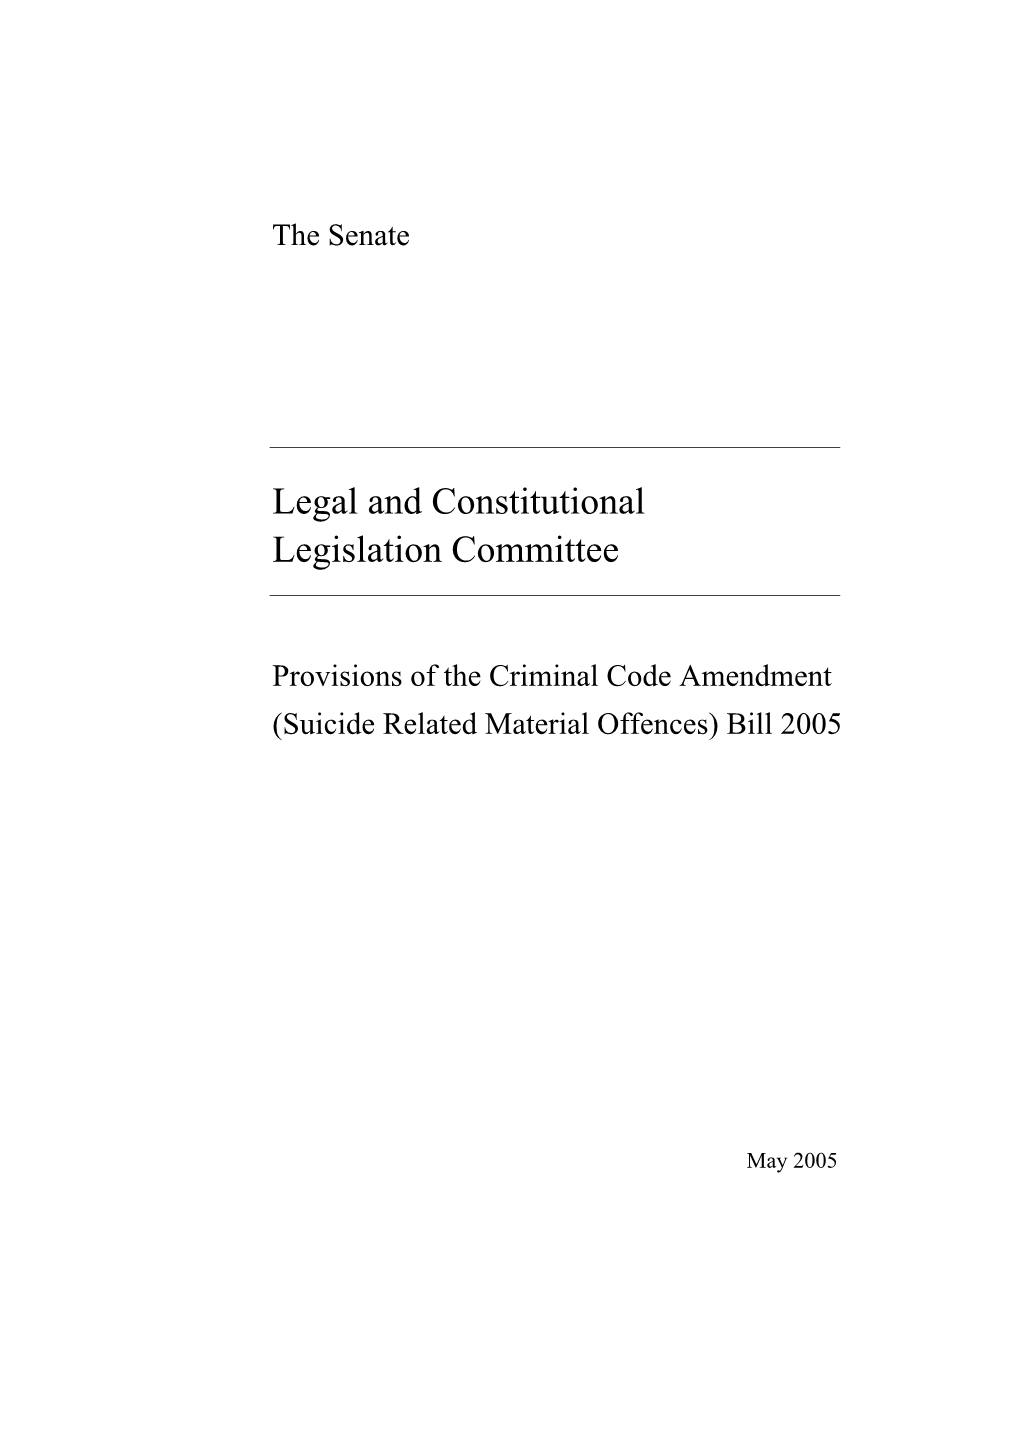 Inquiry Into the Provisions of the Criminal Code Amendment (Suicide Related Material Offences) Bill 2005